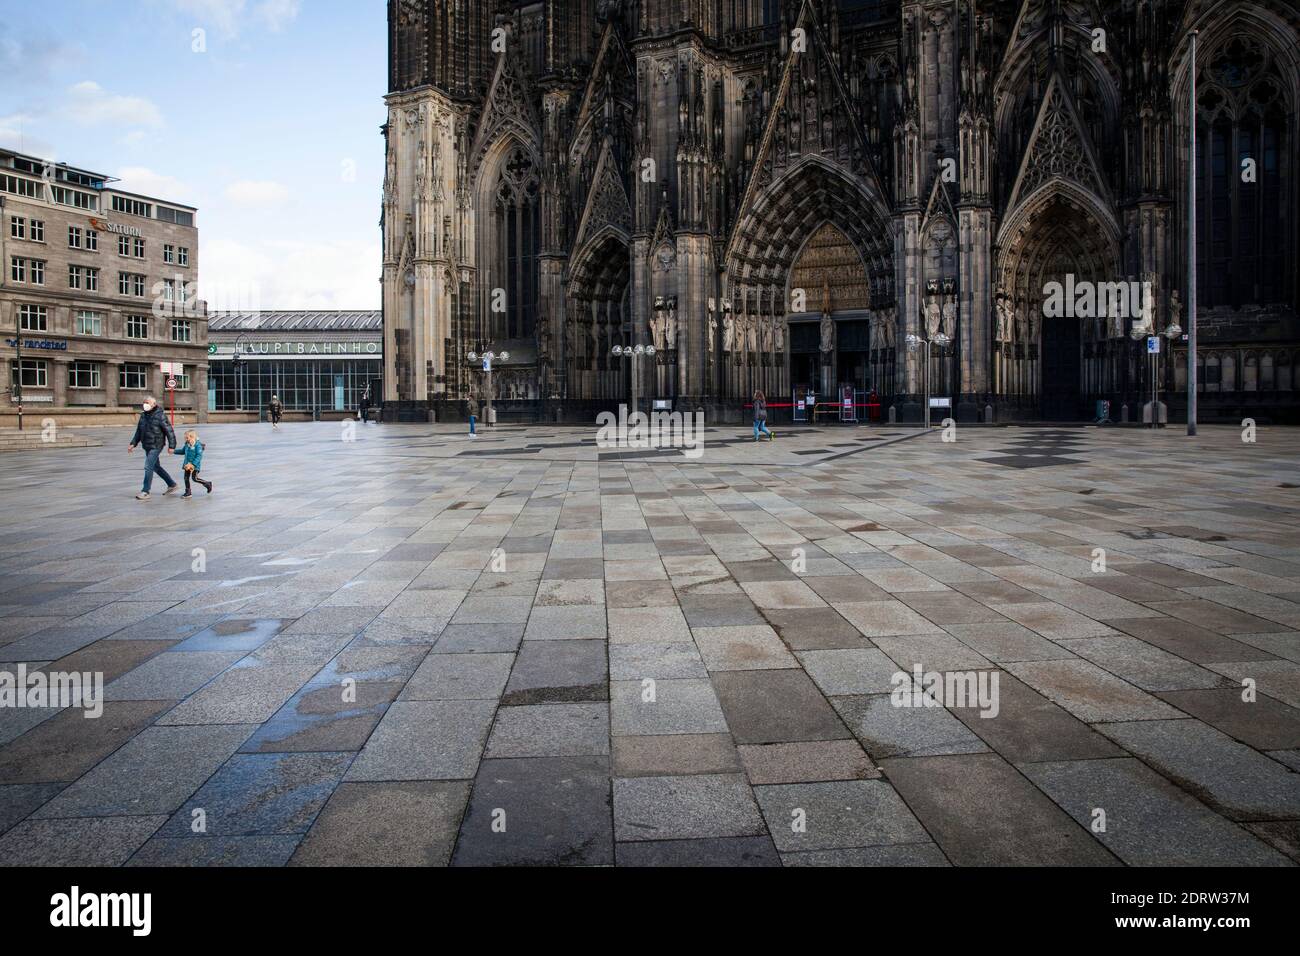 Corona Lockdown, December 17th. 2020. The almost deserted square around Cologne Cathedral, usually visited by thousands of people, Cologne, Germany. Stock Photo